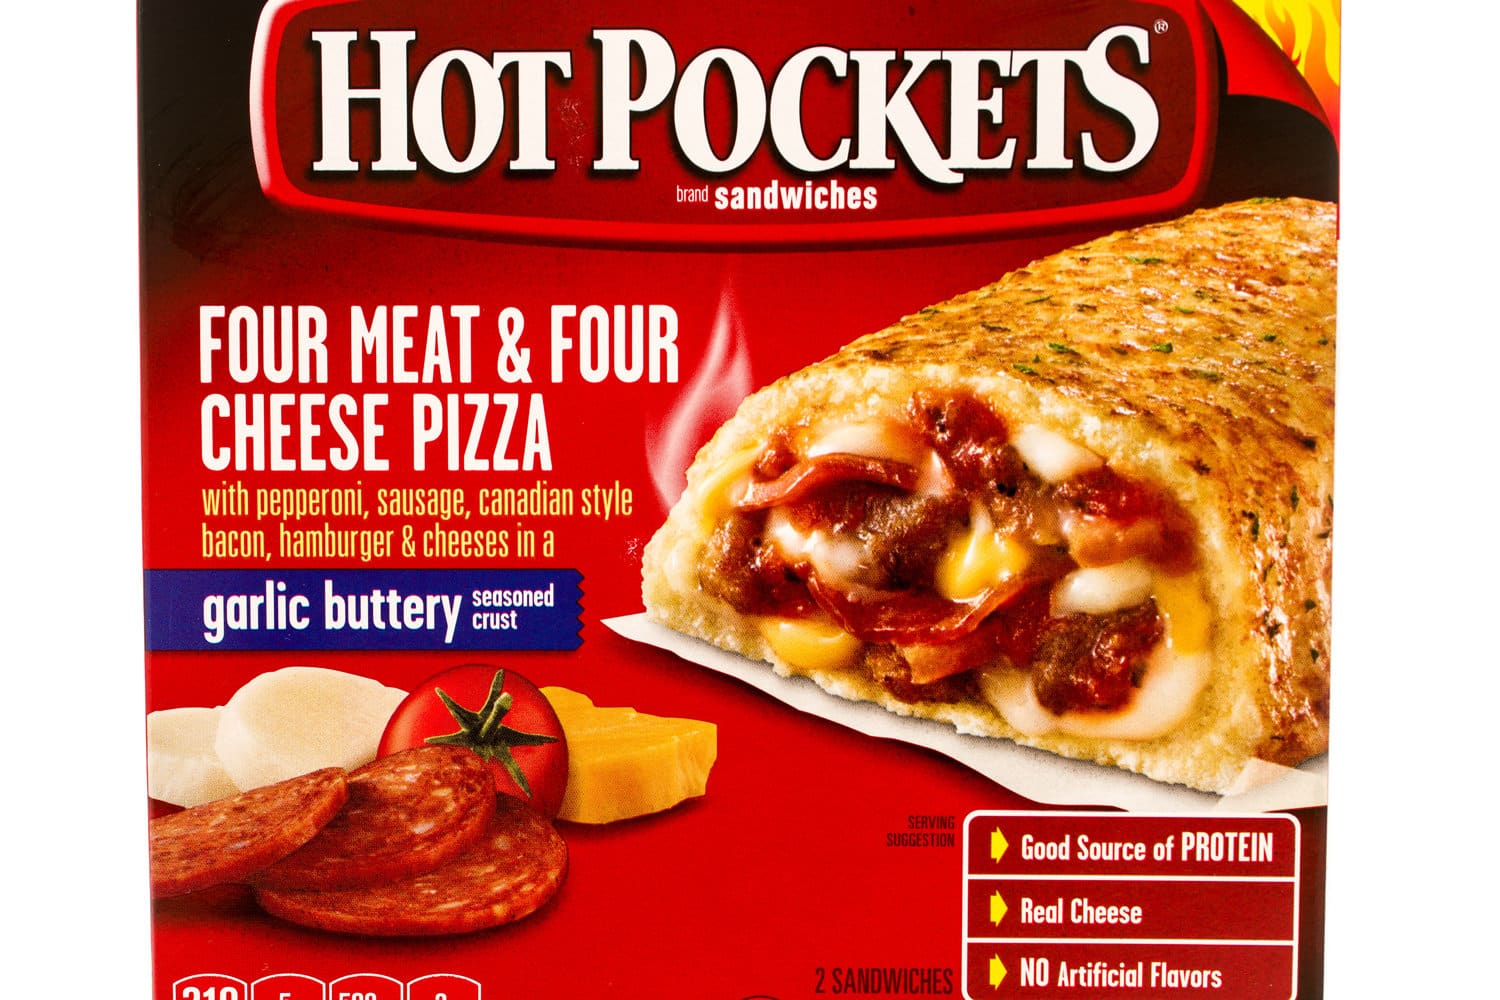 Box of Hot Pockets in four meat & four cheese pizza flavor.